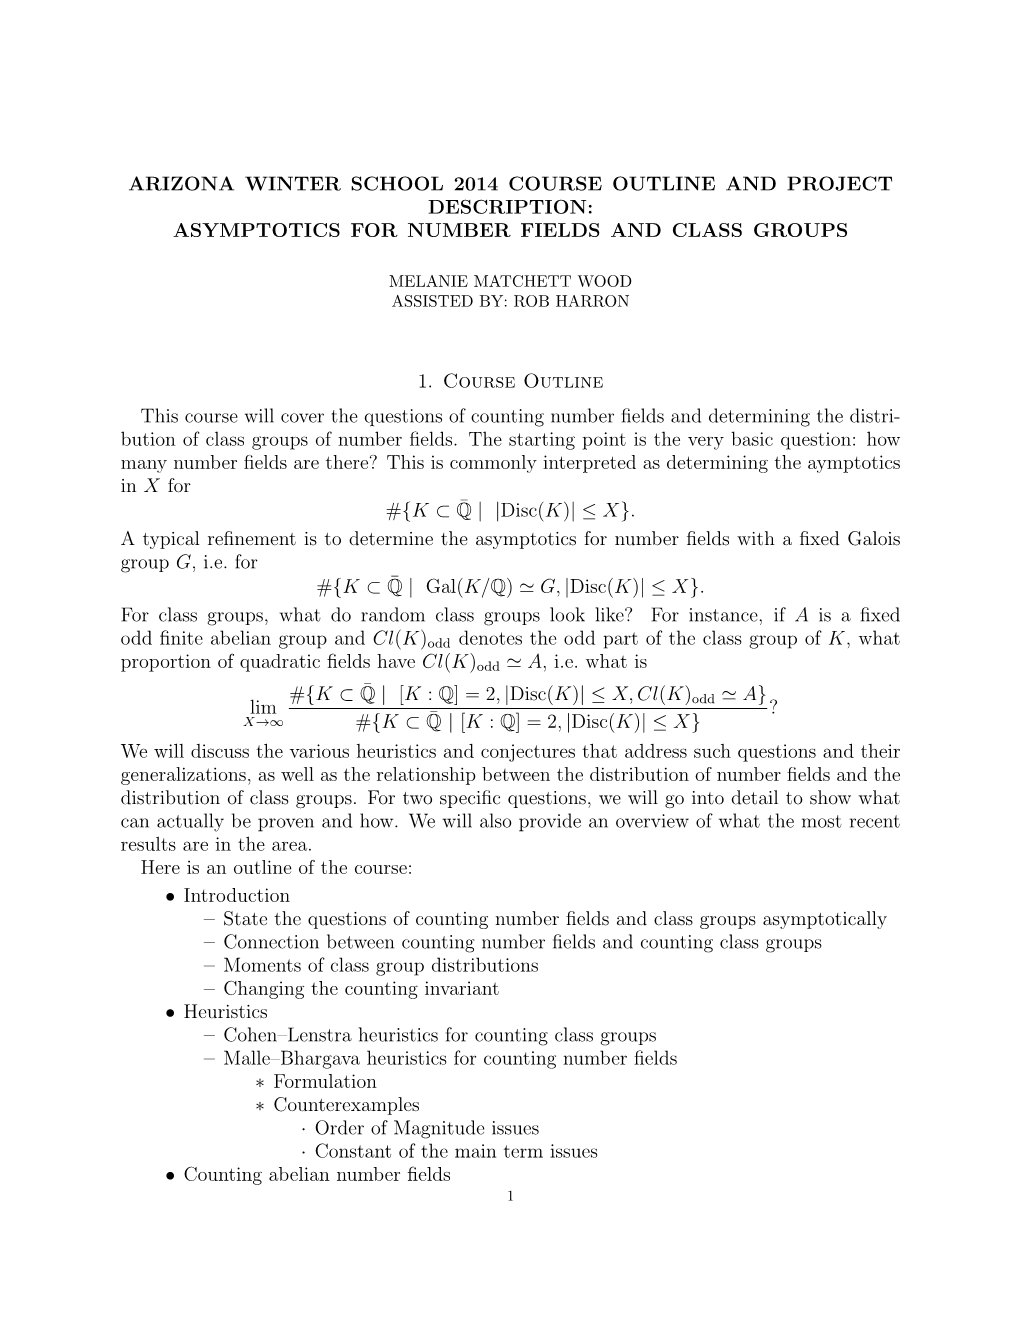 Arizona Winter School 2014 Course Outline and Project Description: Asymptotics for Number Fields and Class Groups